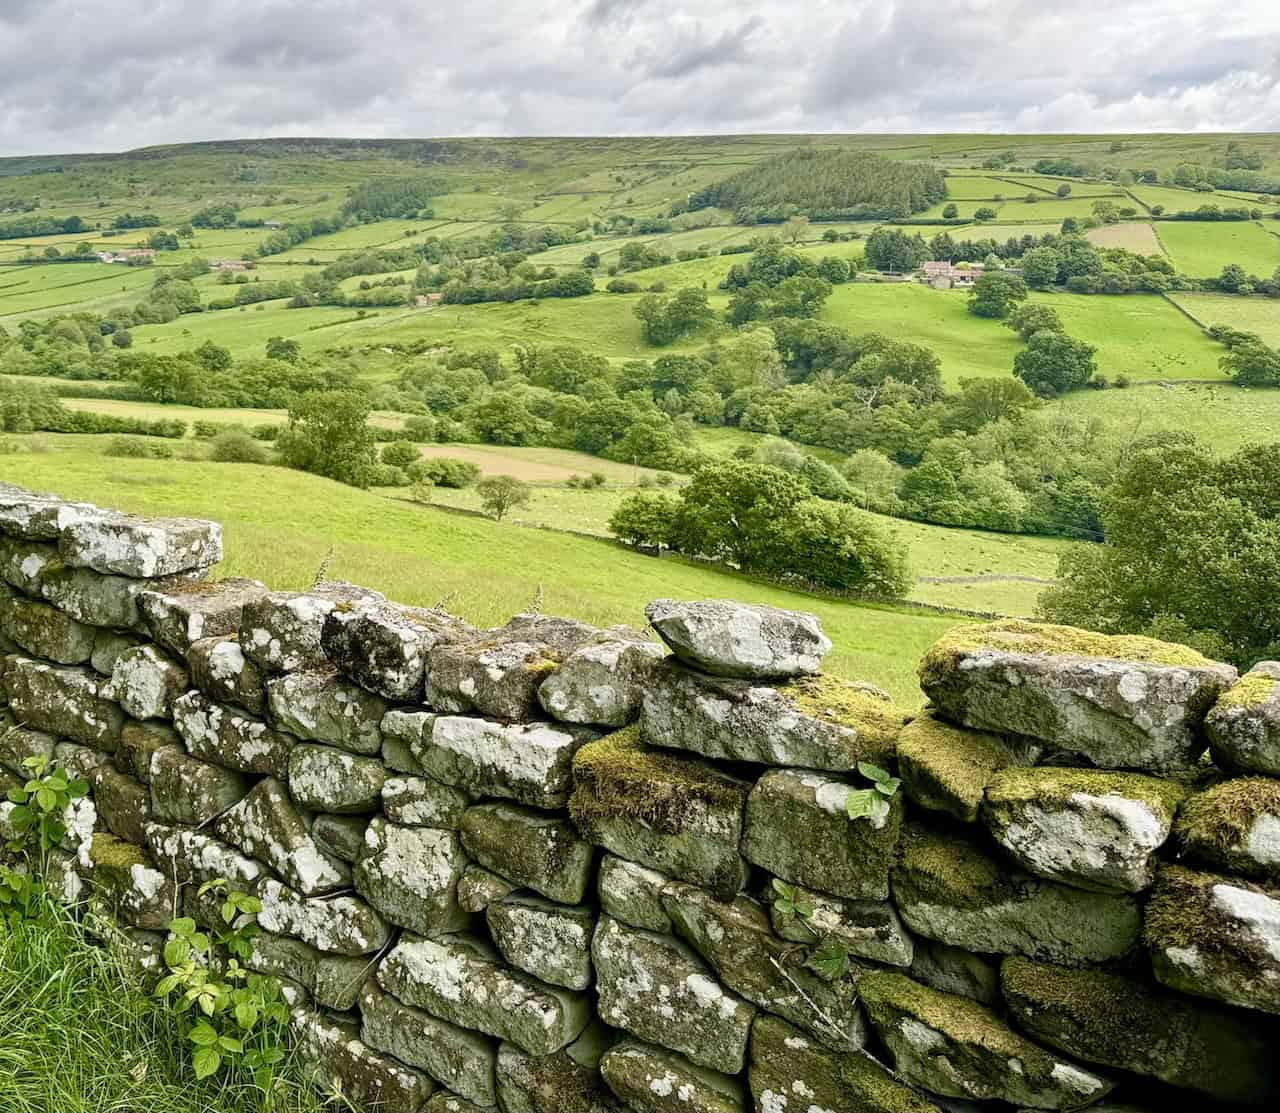 Scenic views of Farndale valley between Park Farm and Cross Farm, with scattered farms and green fields.
